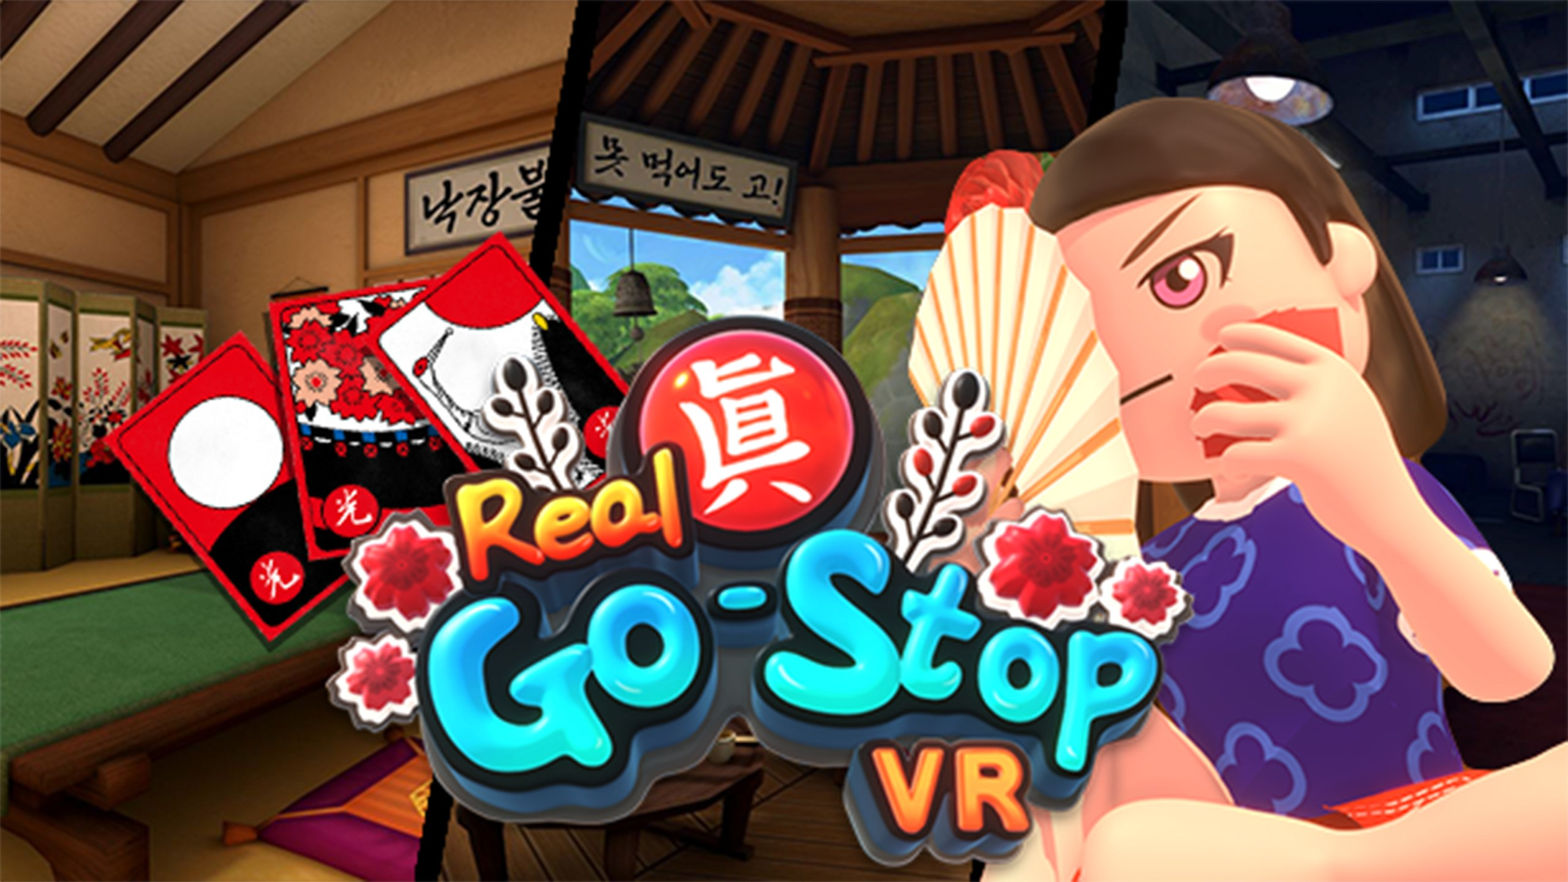 Real-Gostop VR